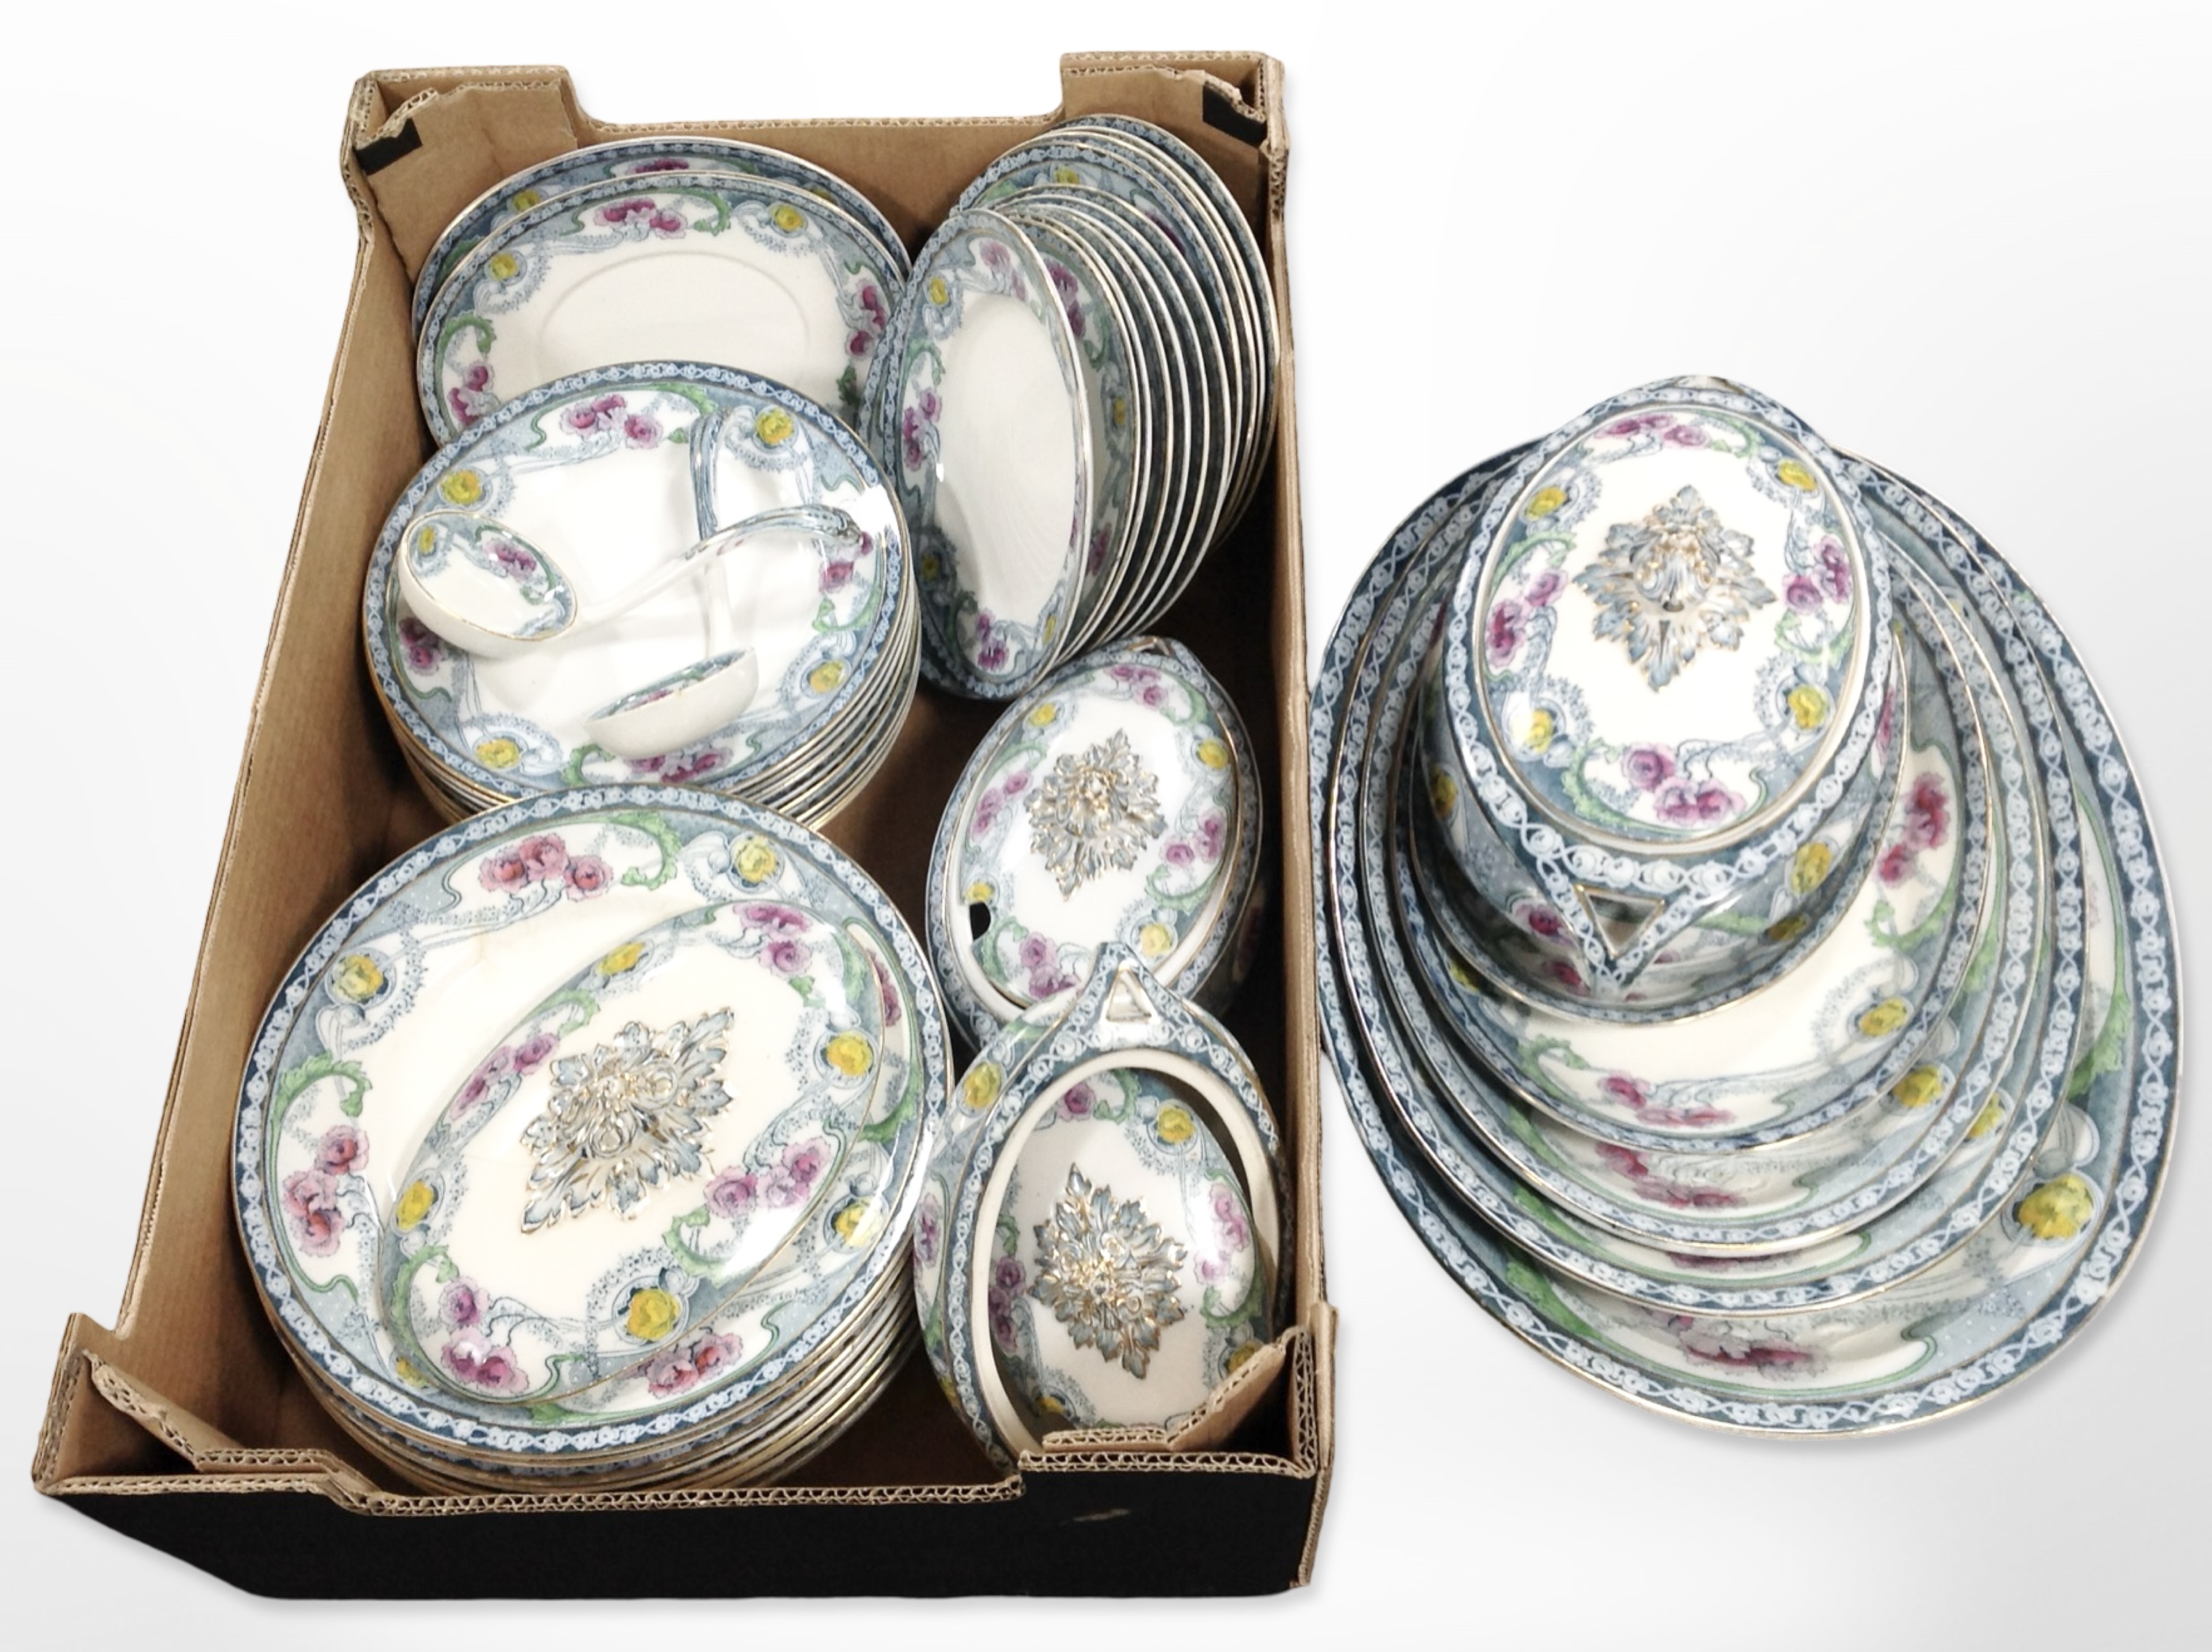 A collection of Royal Staffordshire Pottery Renown dinner porcelain.